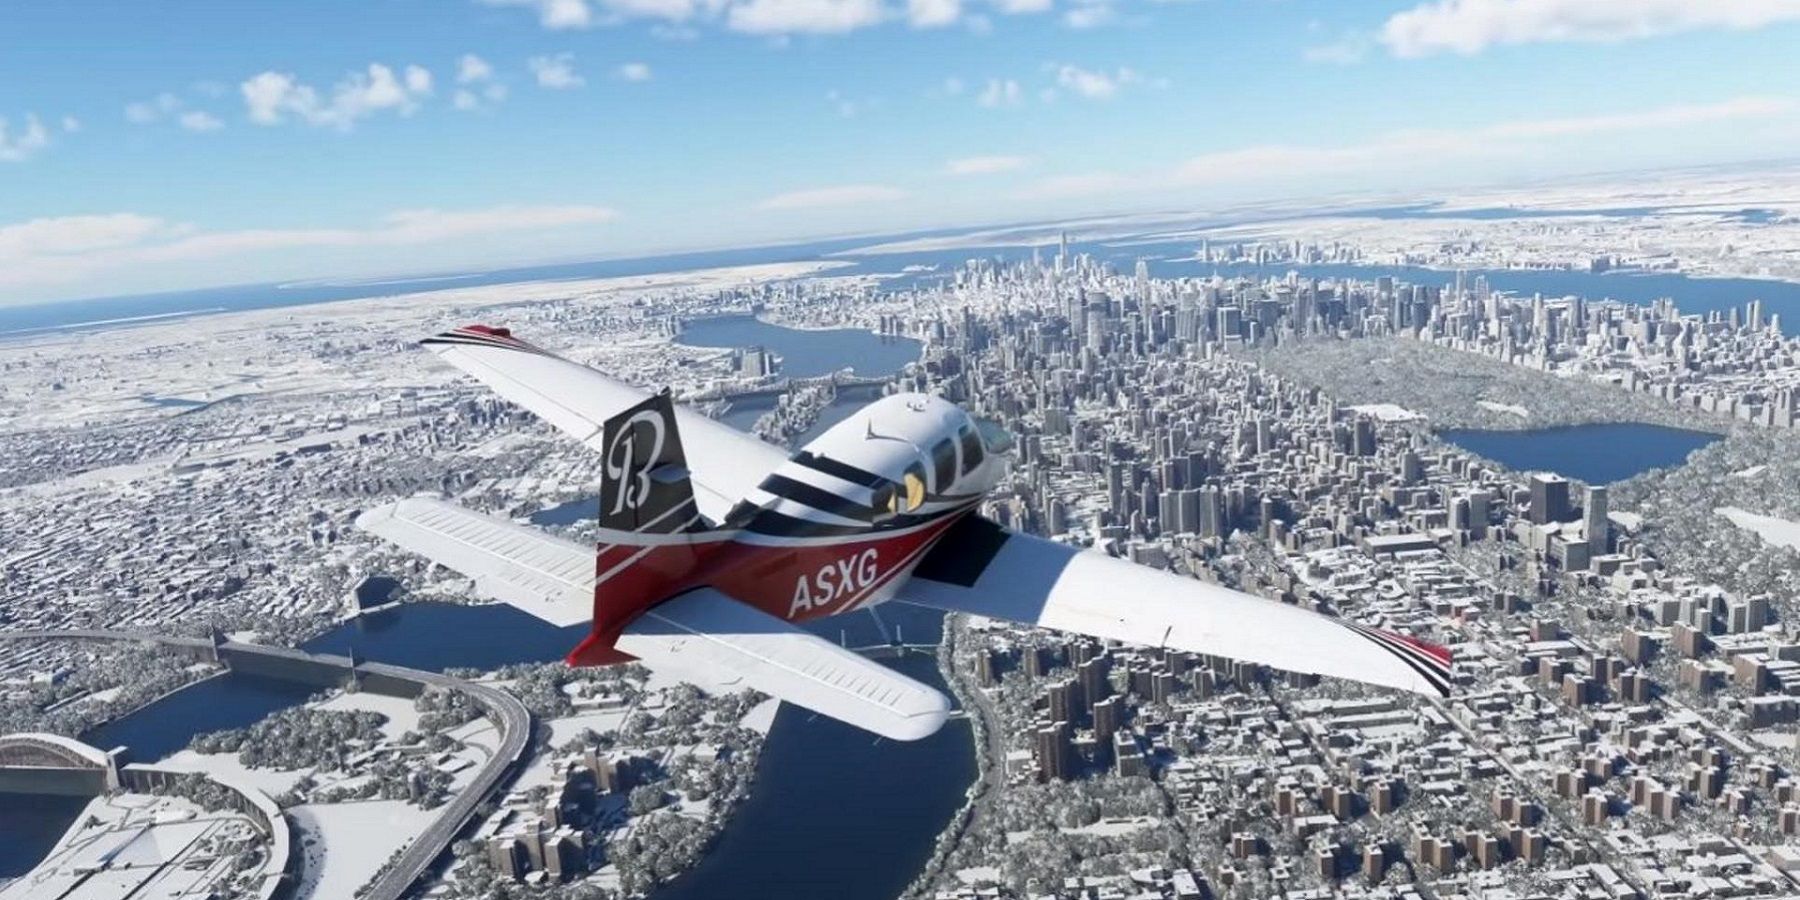 Screenshot from Microsoft Flight Simulator showing a small plane high above a city with the horizon in the background.